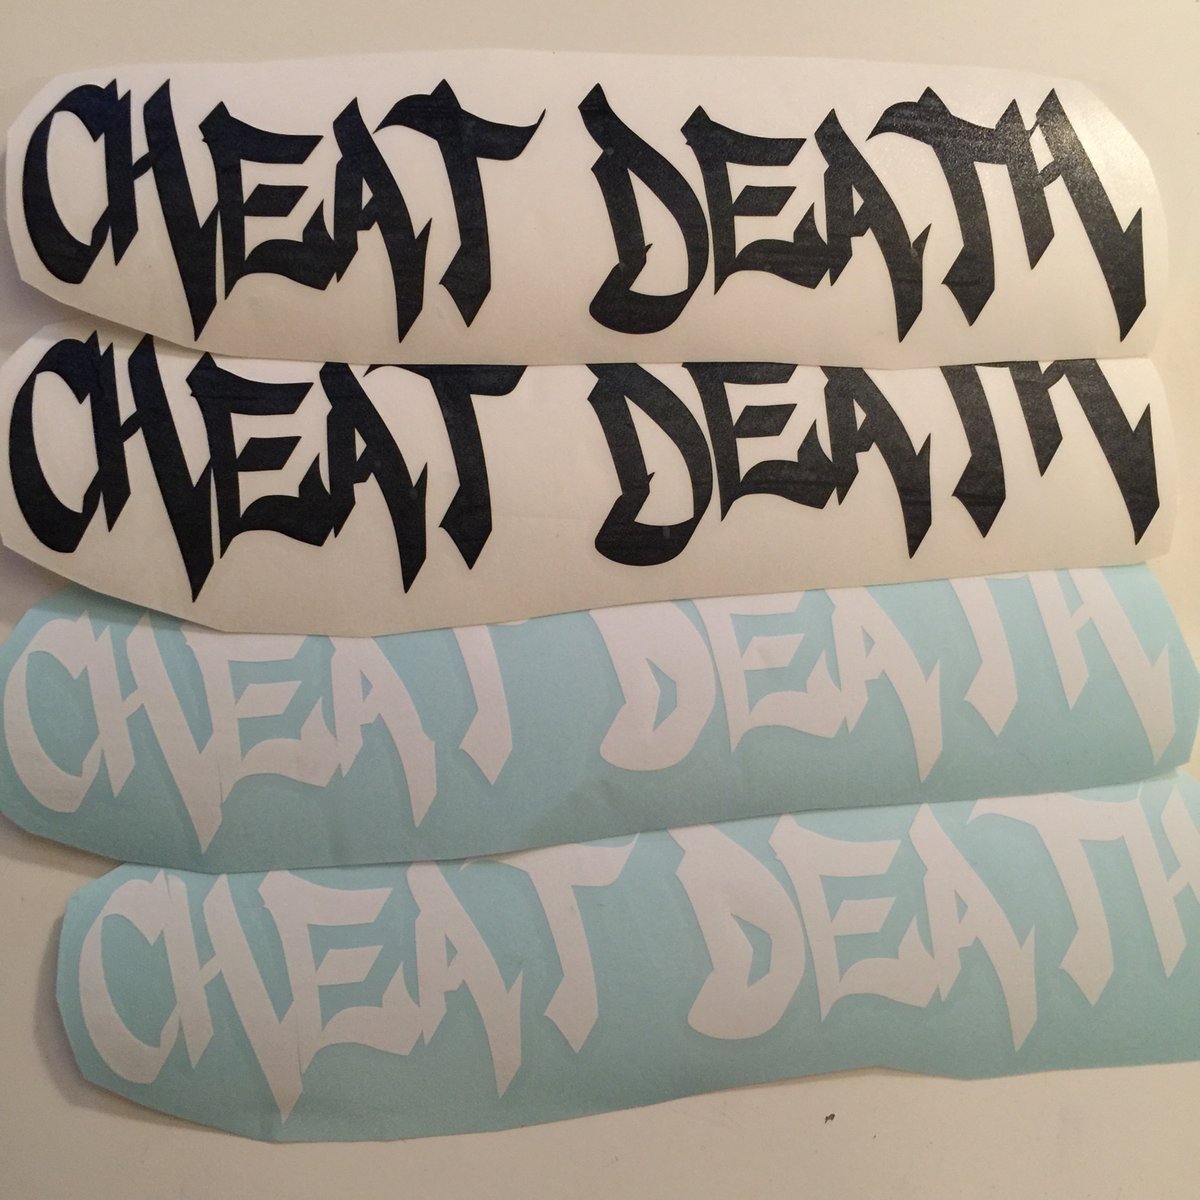 Image of Cheat Death tagger Decal